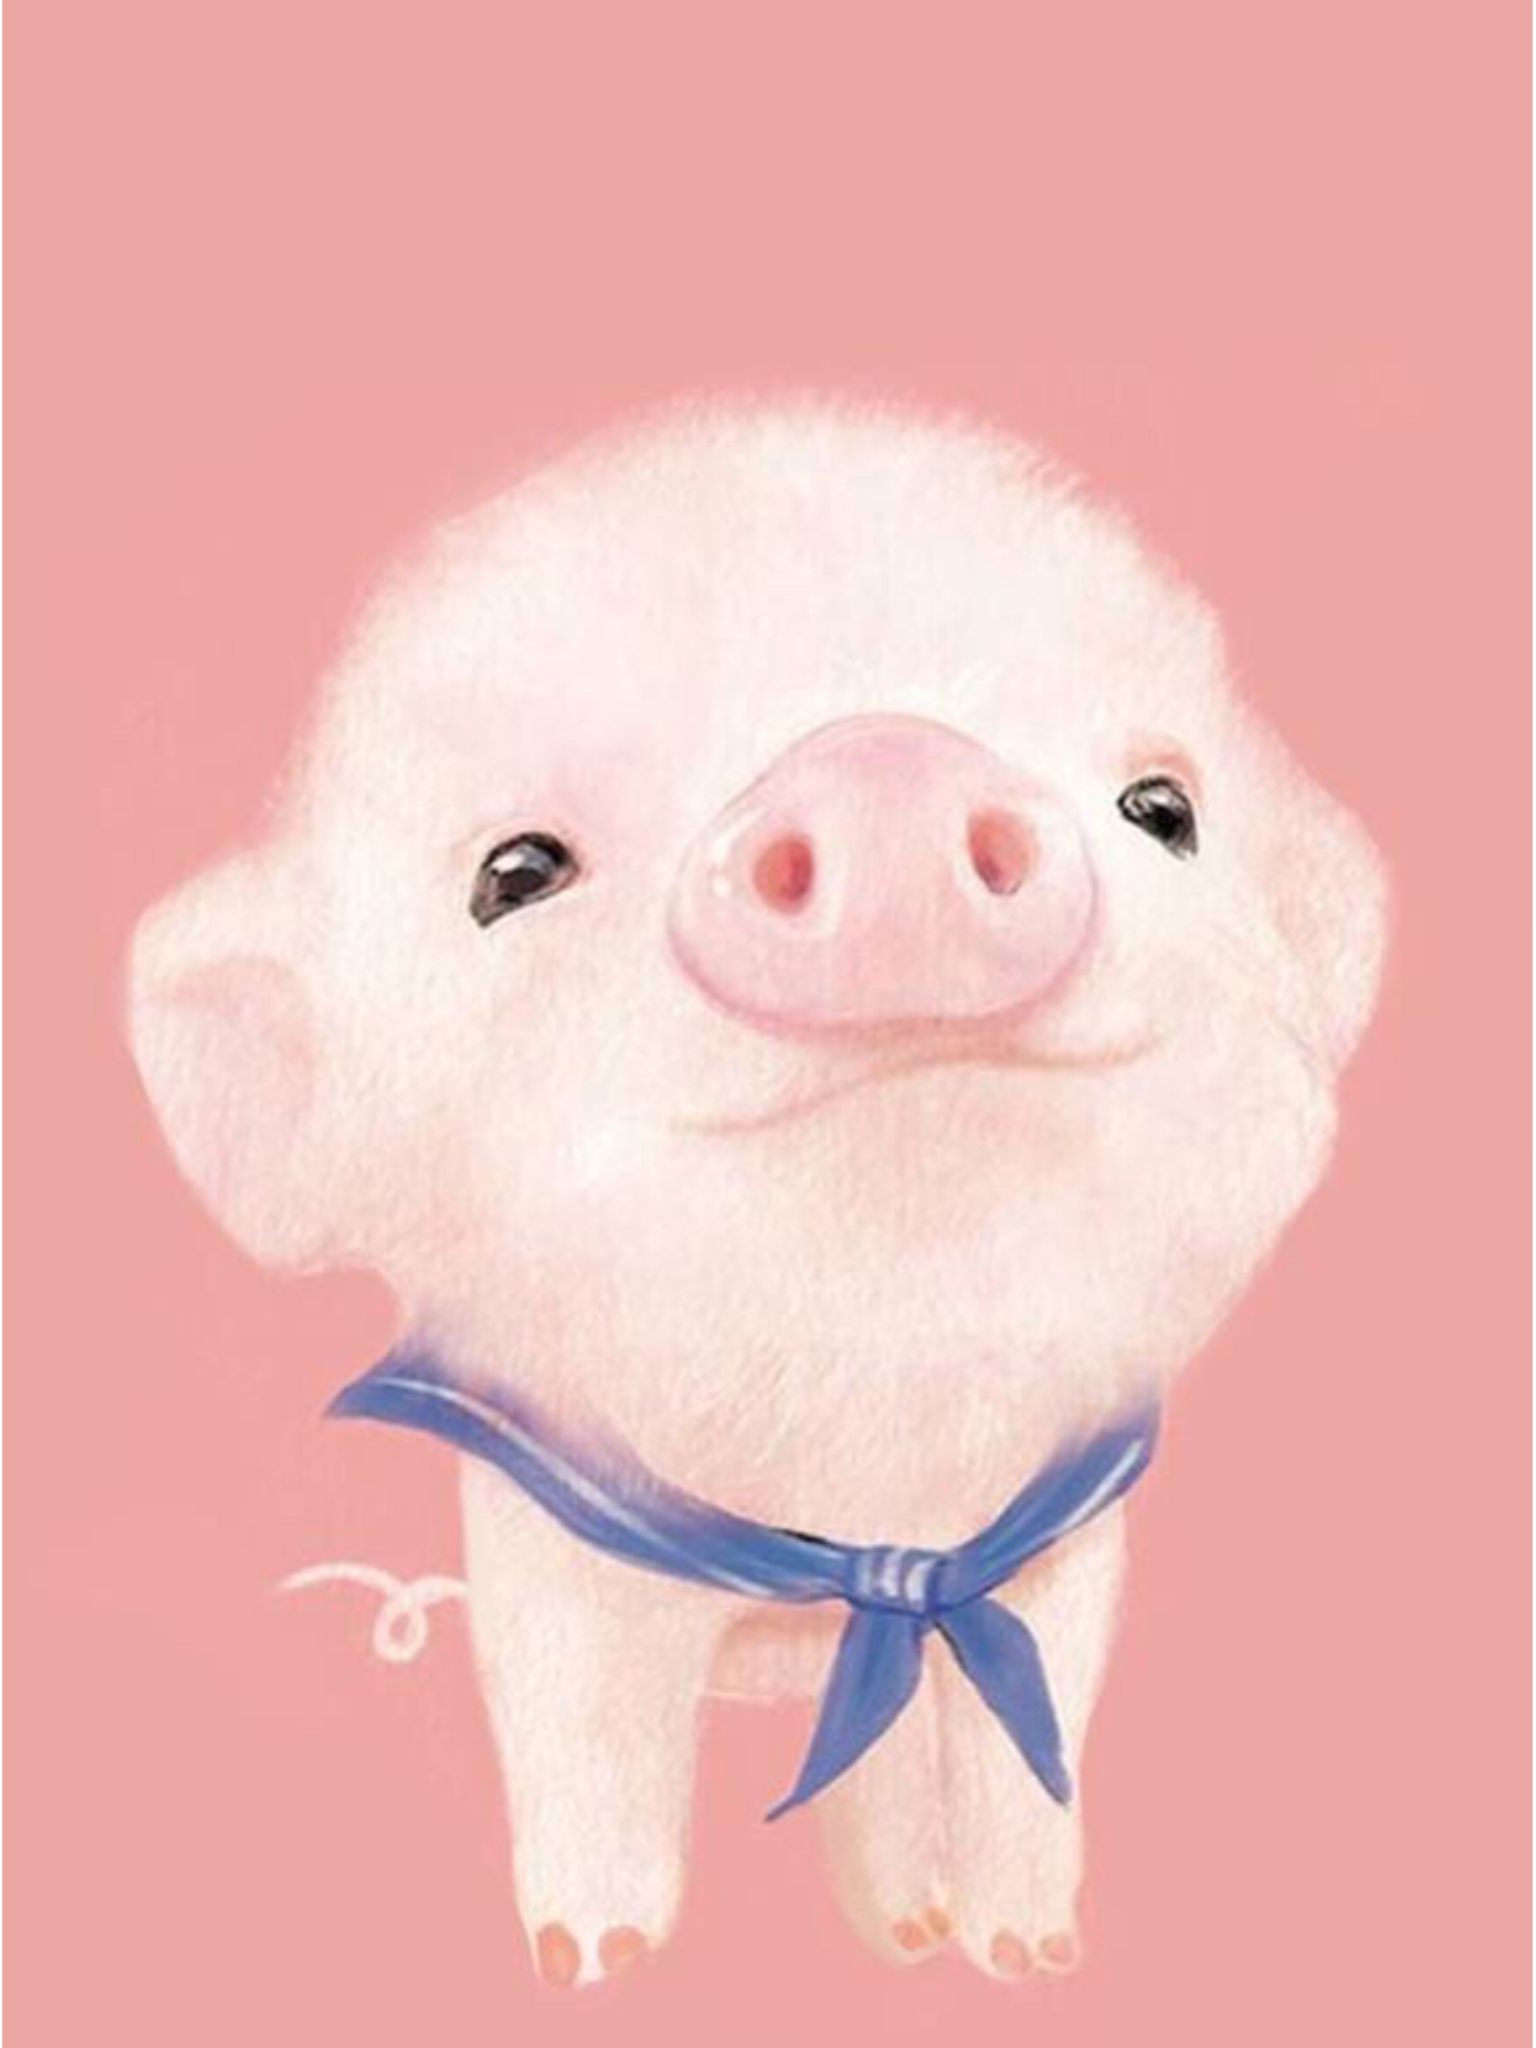 pig iphone wallpaper,domestic pig,suidae,pink,nose,snout